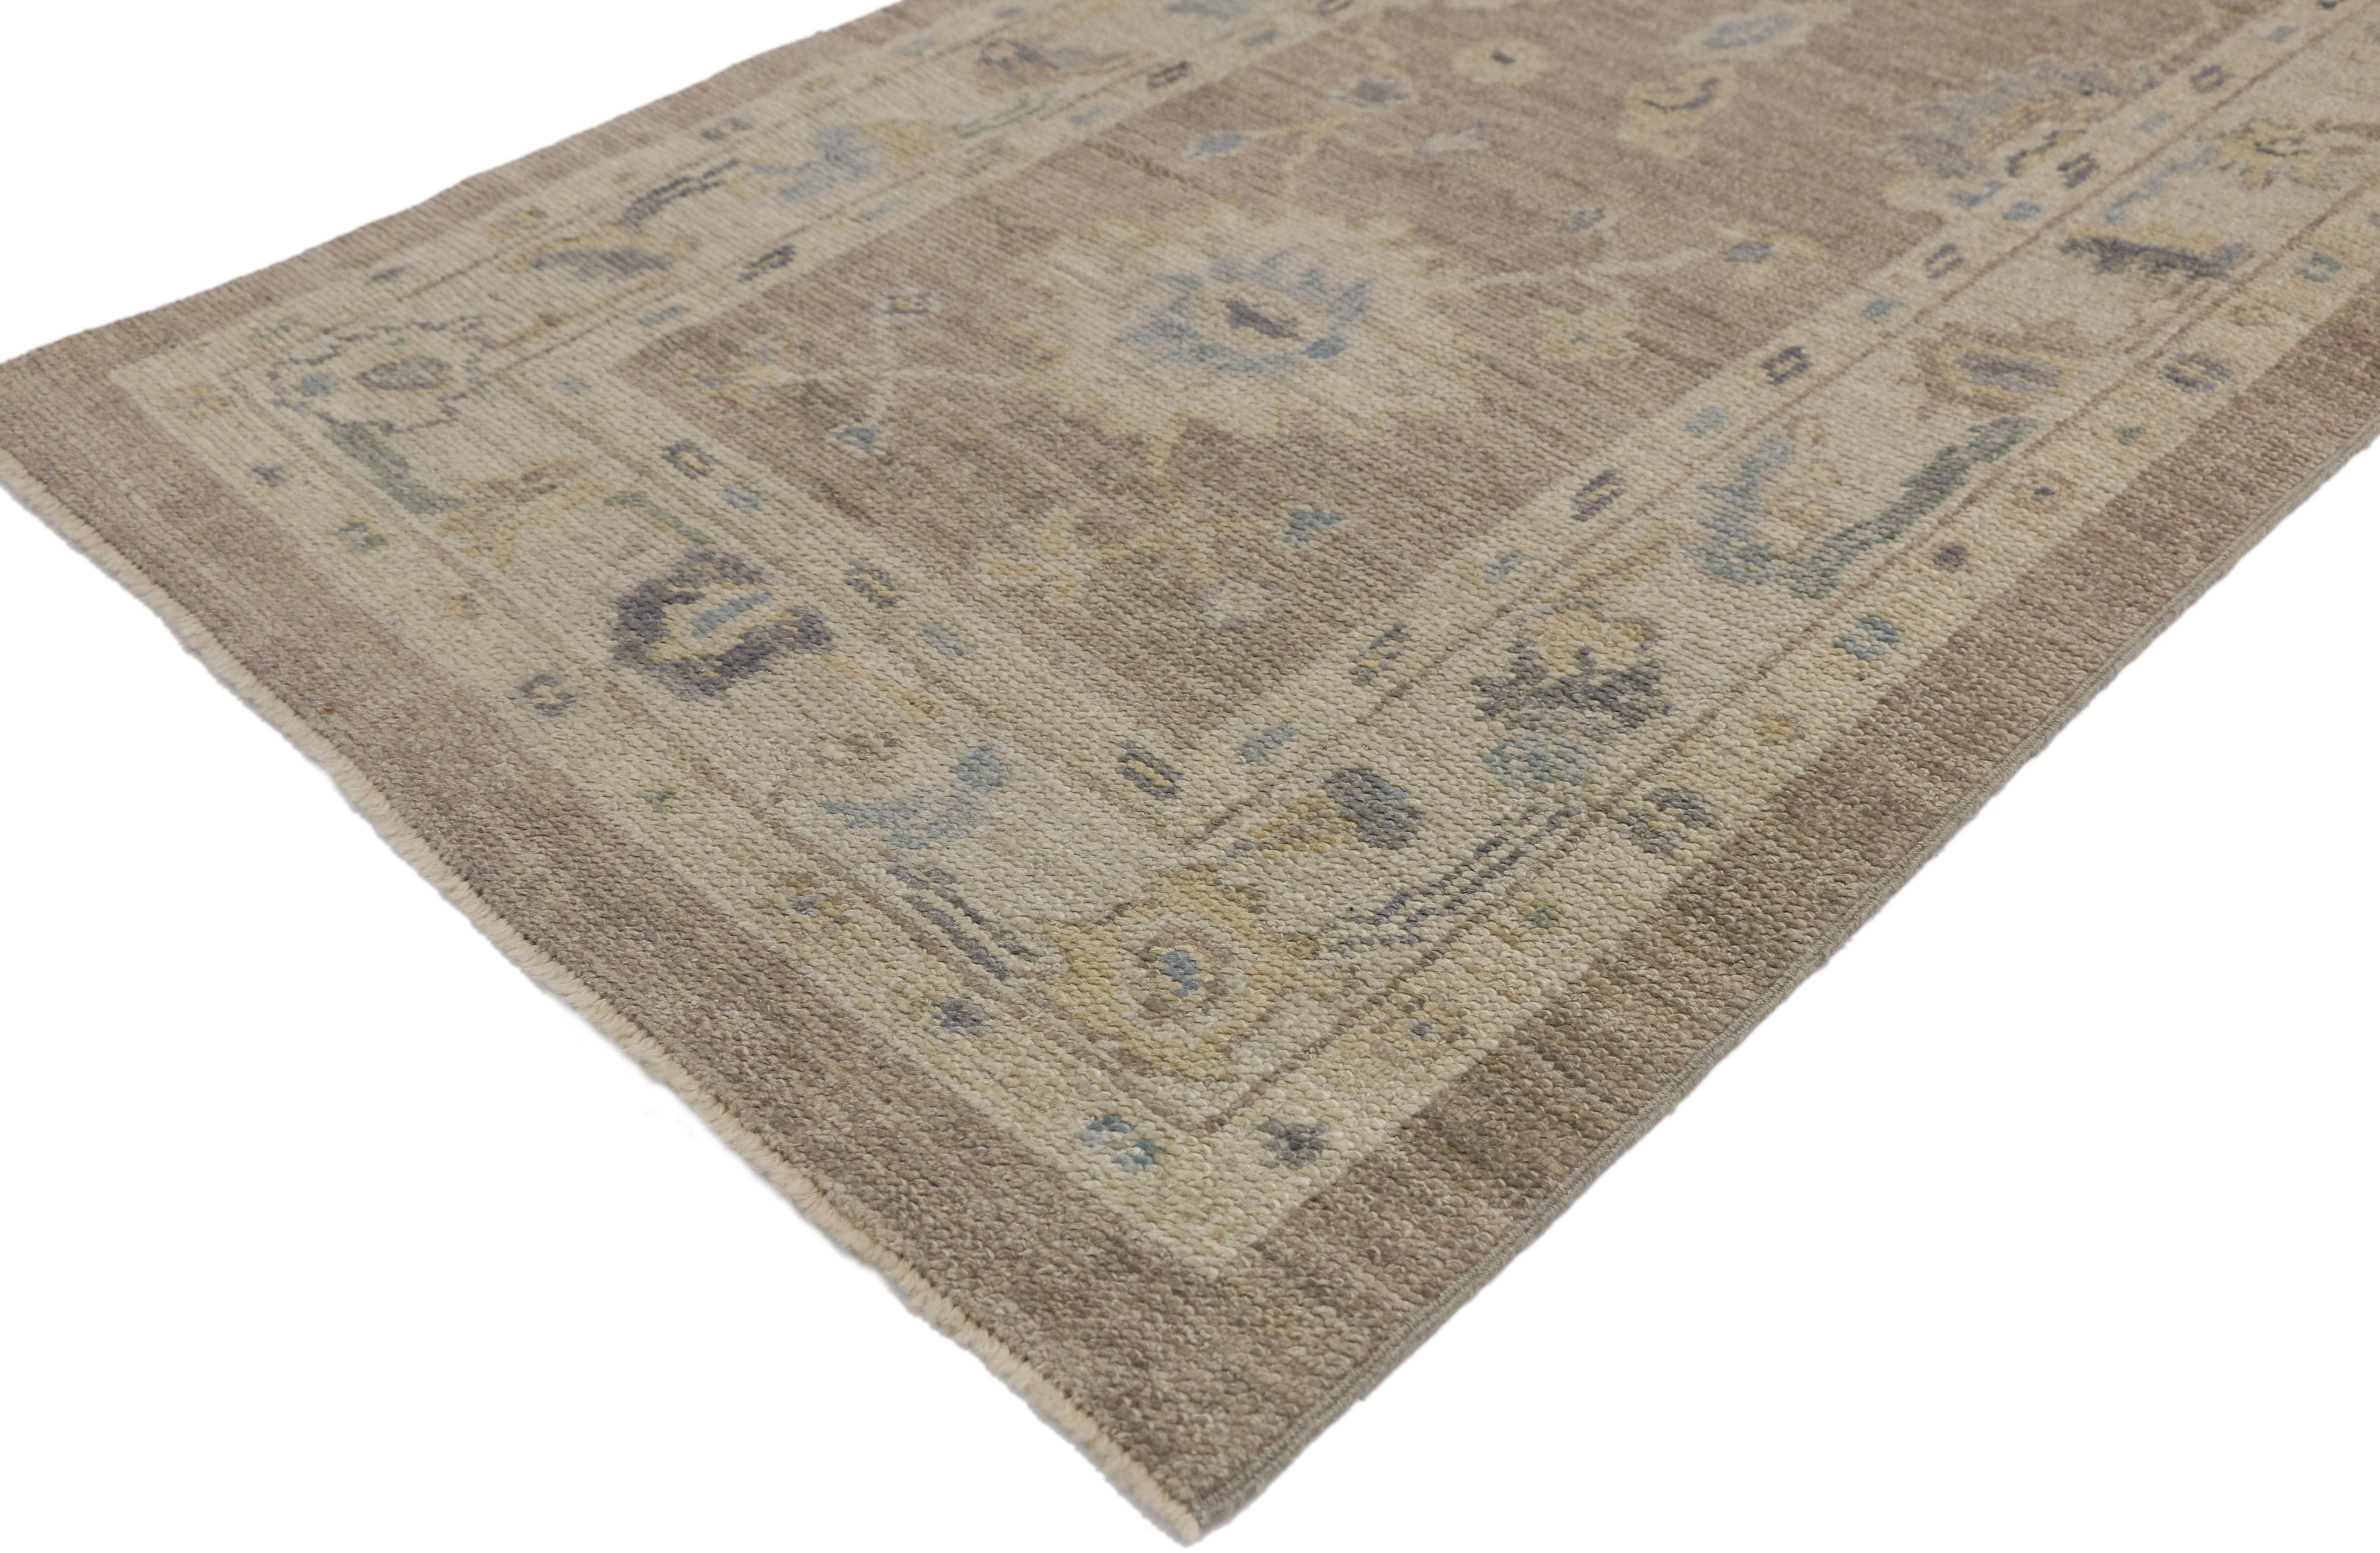 77317 New Turkish Oushak Hallway Runner with Transitional Style 02'09 x 11'07. This hand knotted wool transitional style Turkish Oushak runner features a geometric pattern composed of Harshang-style motifs, blooming palmettes, stylized flowers,